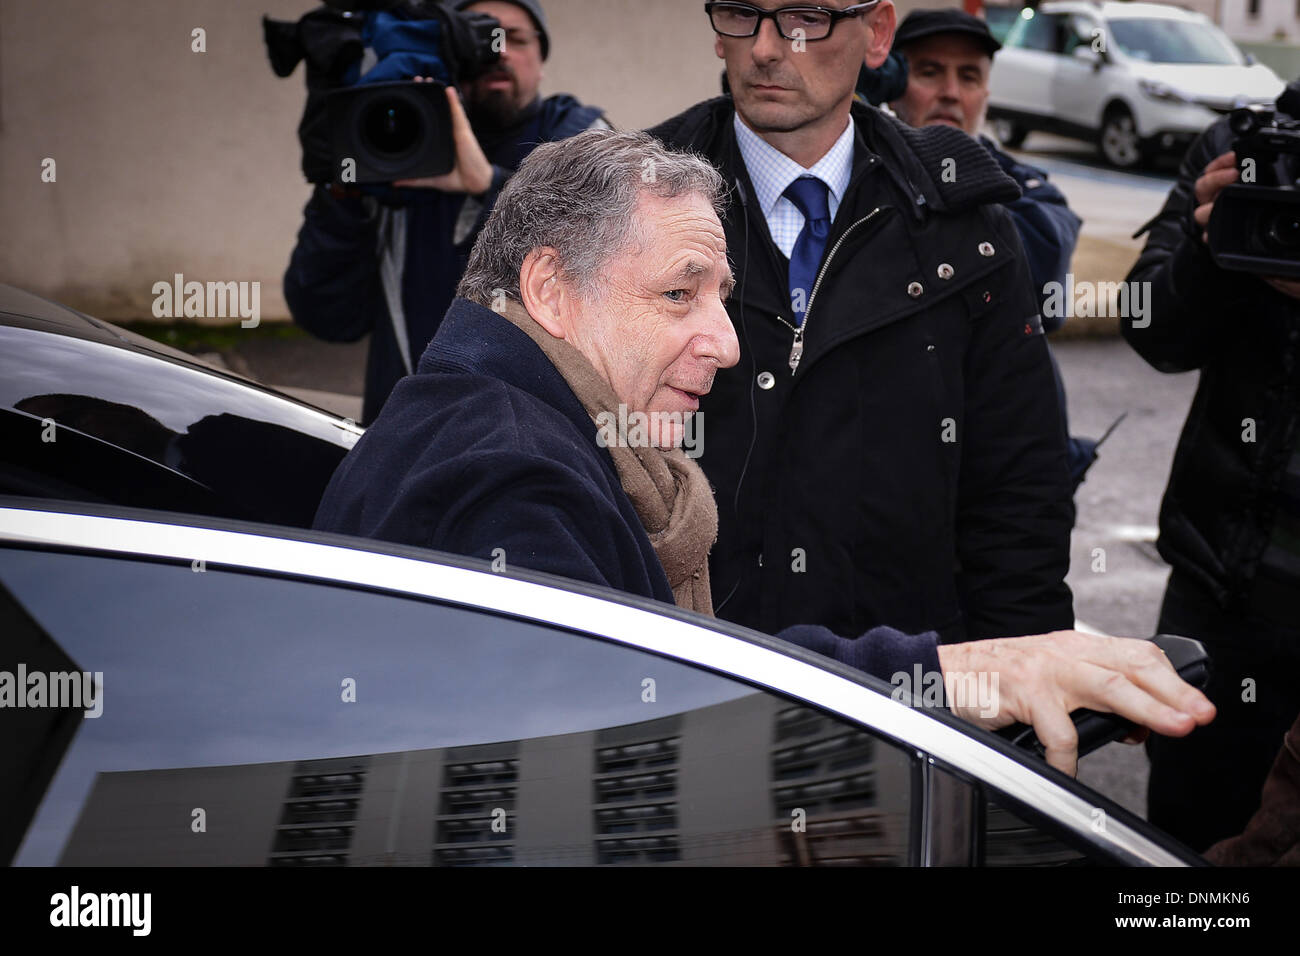 Grenoble, France. 02nd Jan, 2014. President of the Federation Internationale de l'Automobile (F.I.A.) Jean Todt in front of 'Centre Hospitalier Universitaire' (CHU) hospital in Grenoble, near the French Alps, France, 02 January 2014. Retired Formula One German racing driver Michael Schumacher is still in a critical condition, after he underwent emergency surgery after being admitted in a coma with a cranial trauma following a ski accident in Meribel, according to the hospital in Grenoble. Photo: David Ebener/dpa/Alamy Live News Stock Photo